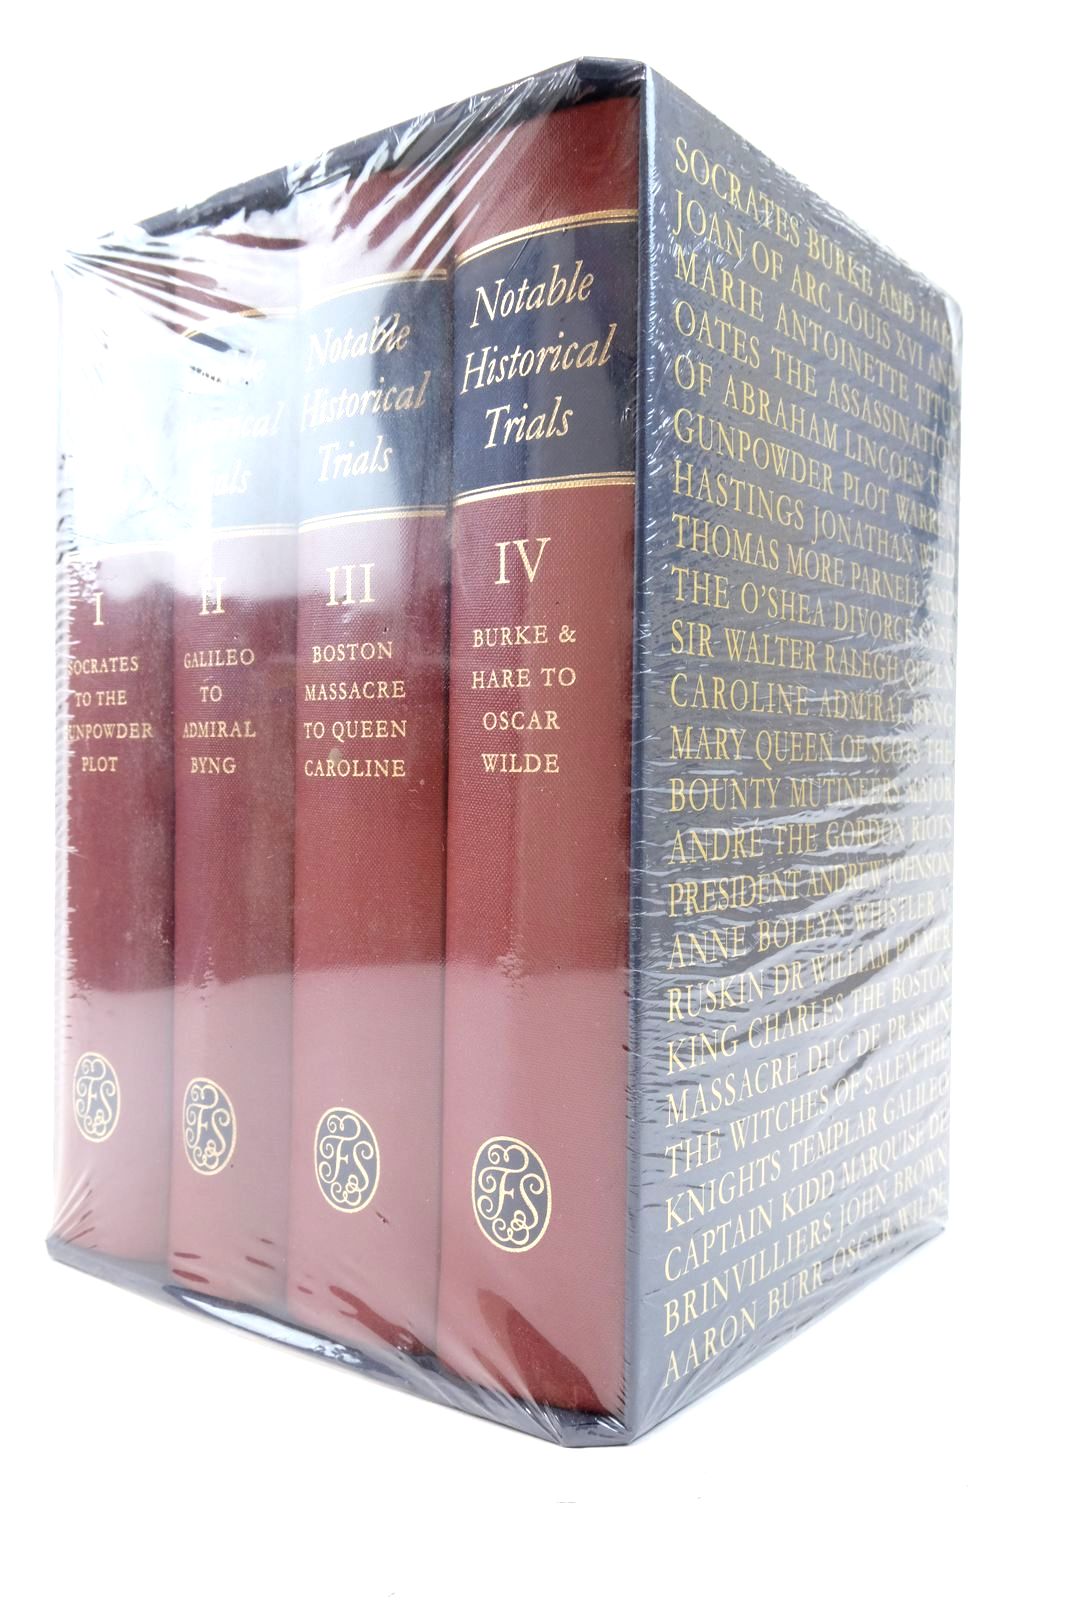 Photo of NOTABLE HISTORICAL TRIALS (4 VOLUMES) written by Lovill, Justin published by Folio Society (STOCK CODE: 2136724)  for sale by Stella & Rose's Books